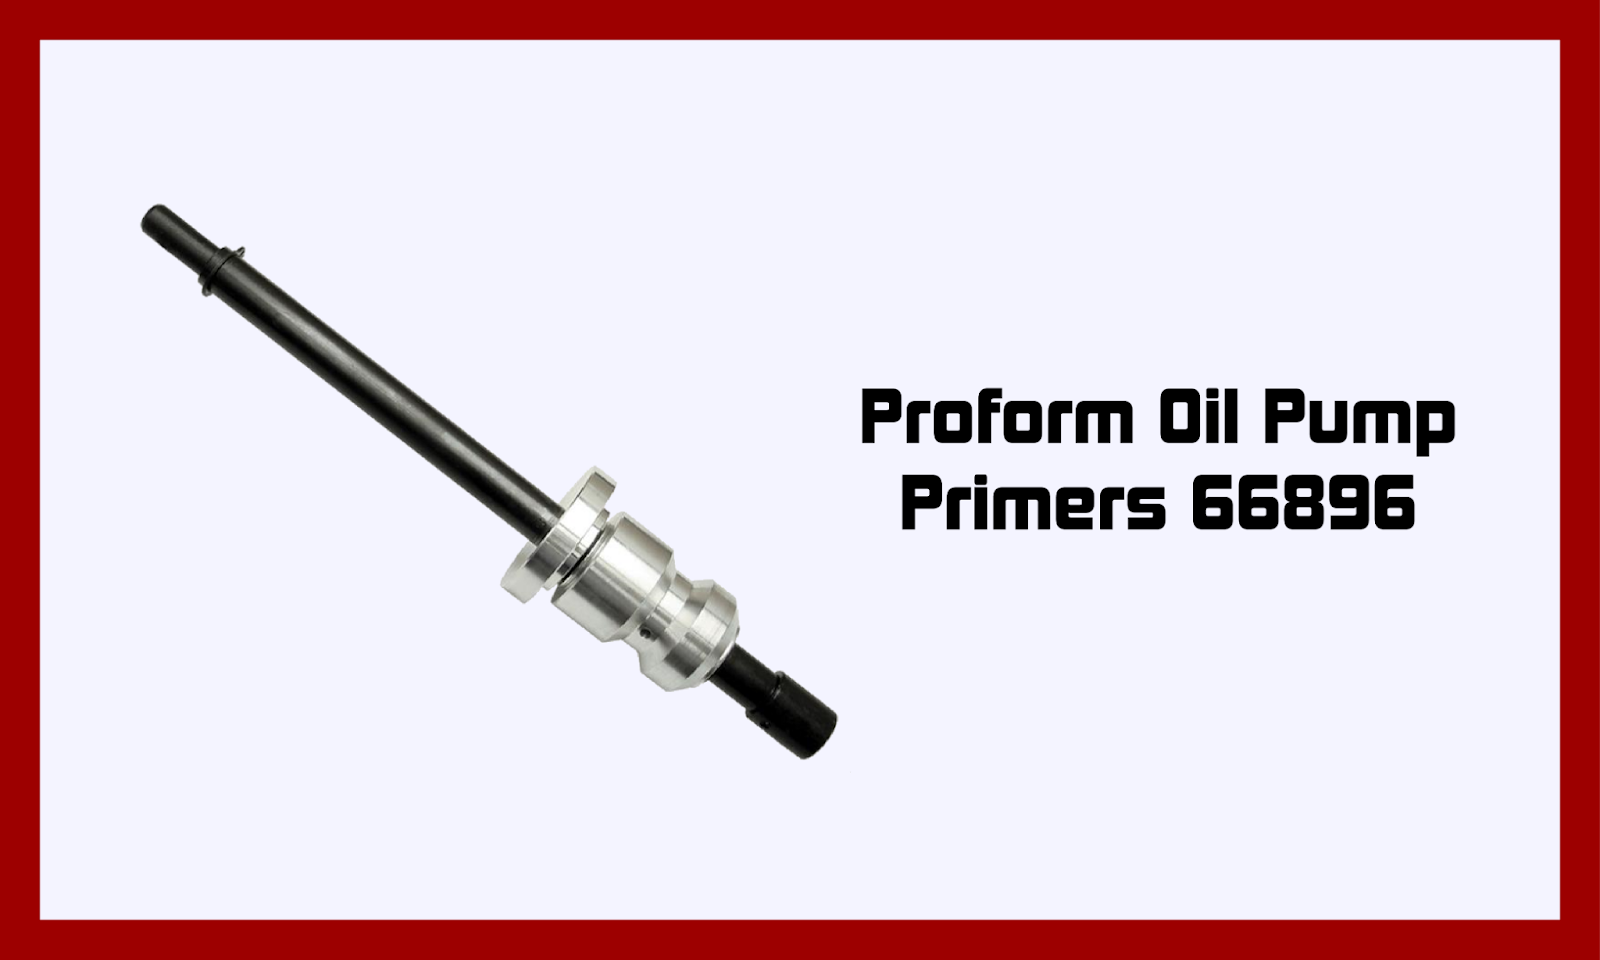 Oil pump priming tool for Chevy small block and big block. 